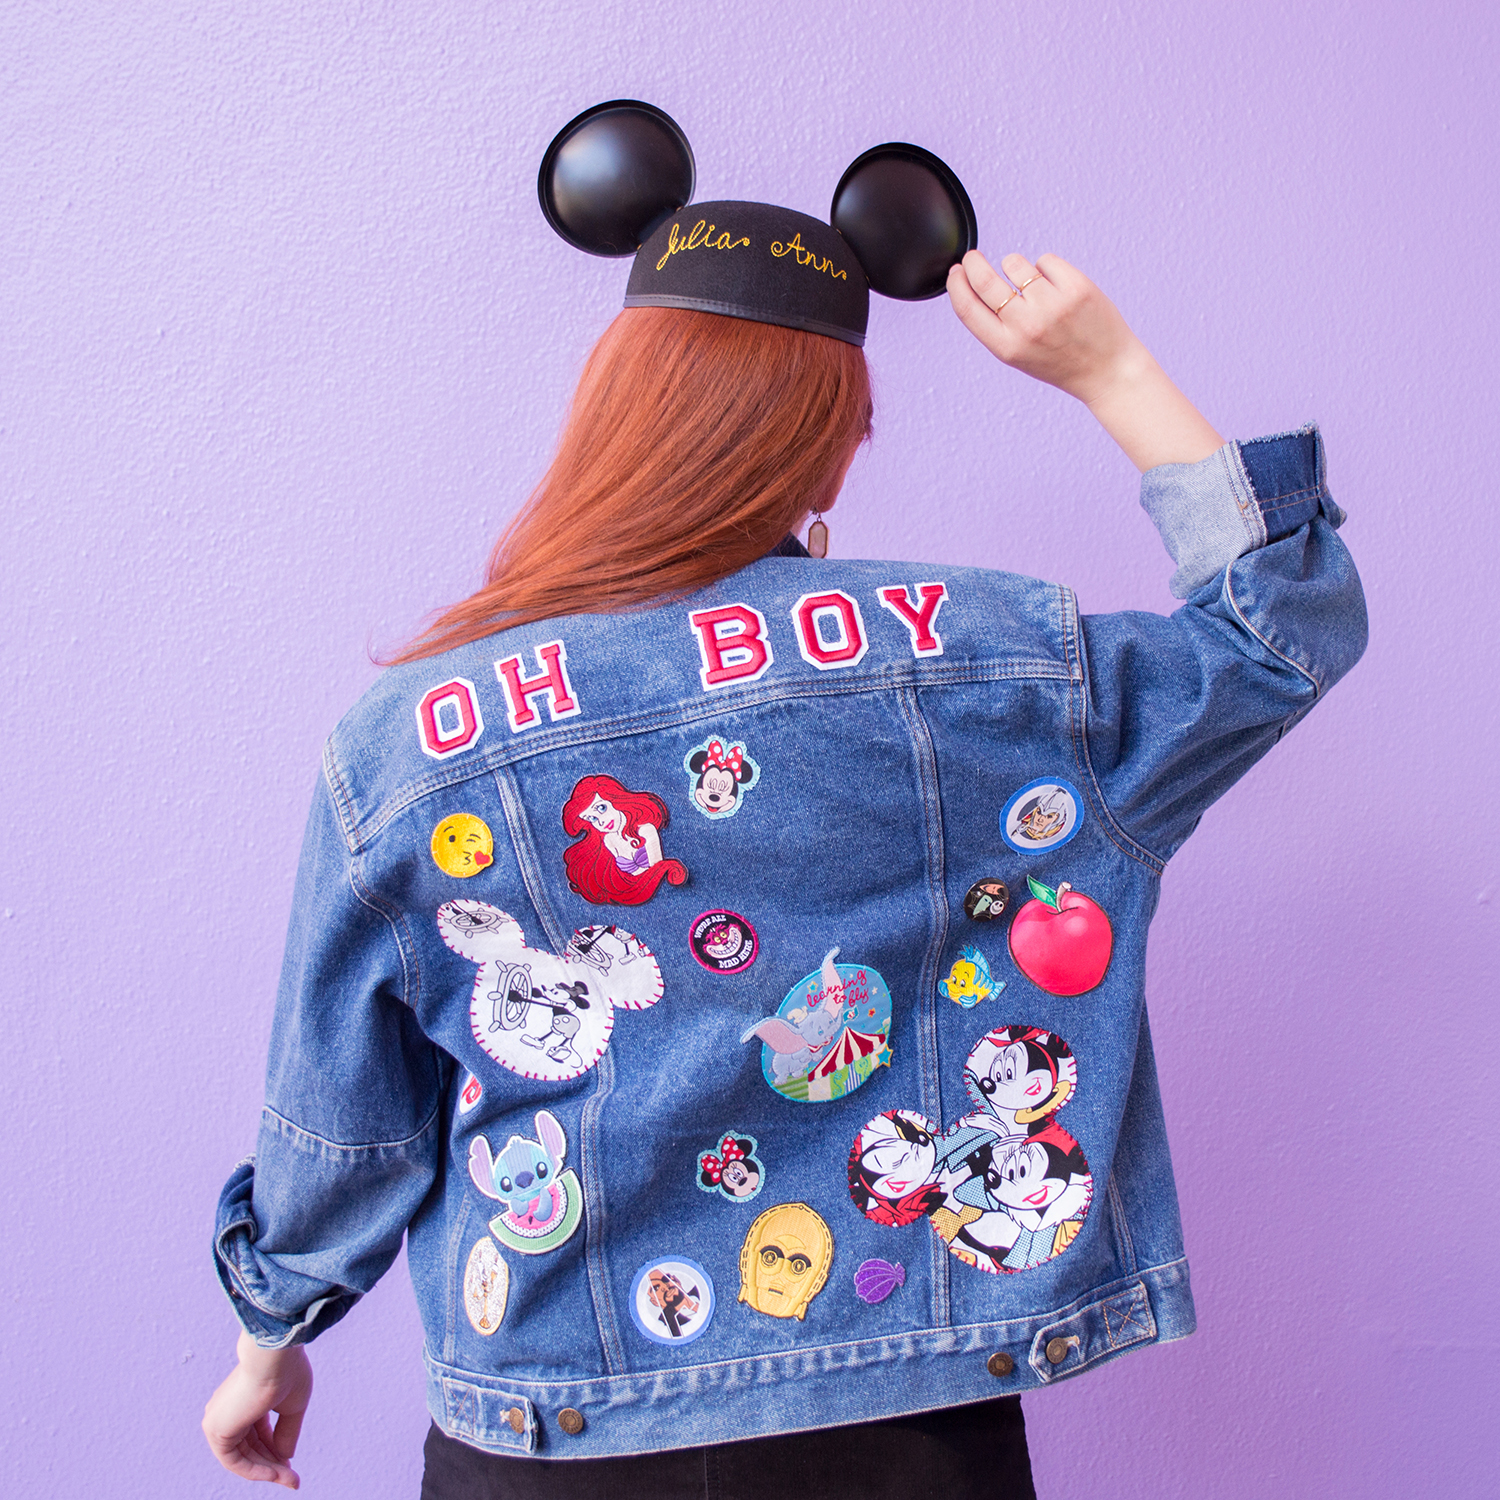 Large Sew on Mickey Mouse Patch, Disney Iron on Patch, Embroidery Patches  for Denim Jacket, Patches for Jeans, Patches Set 